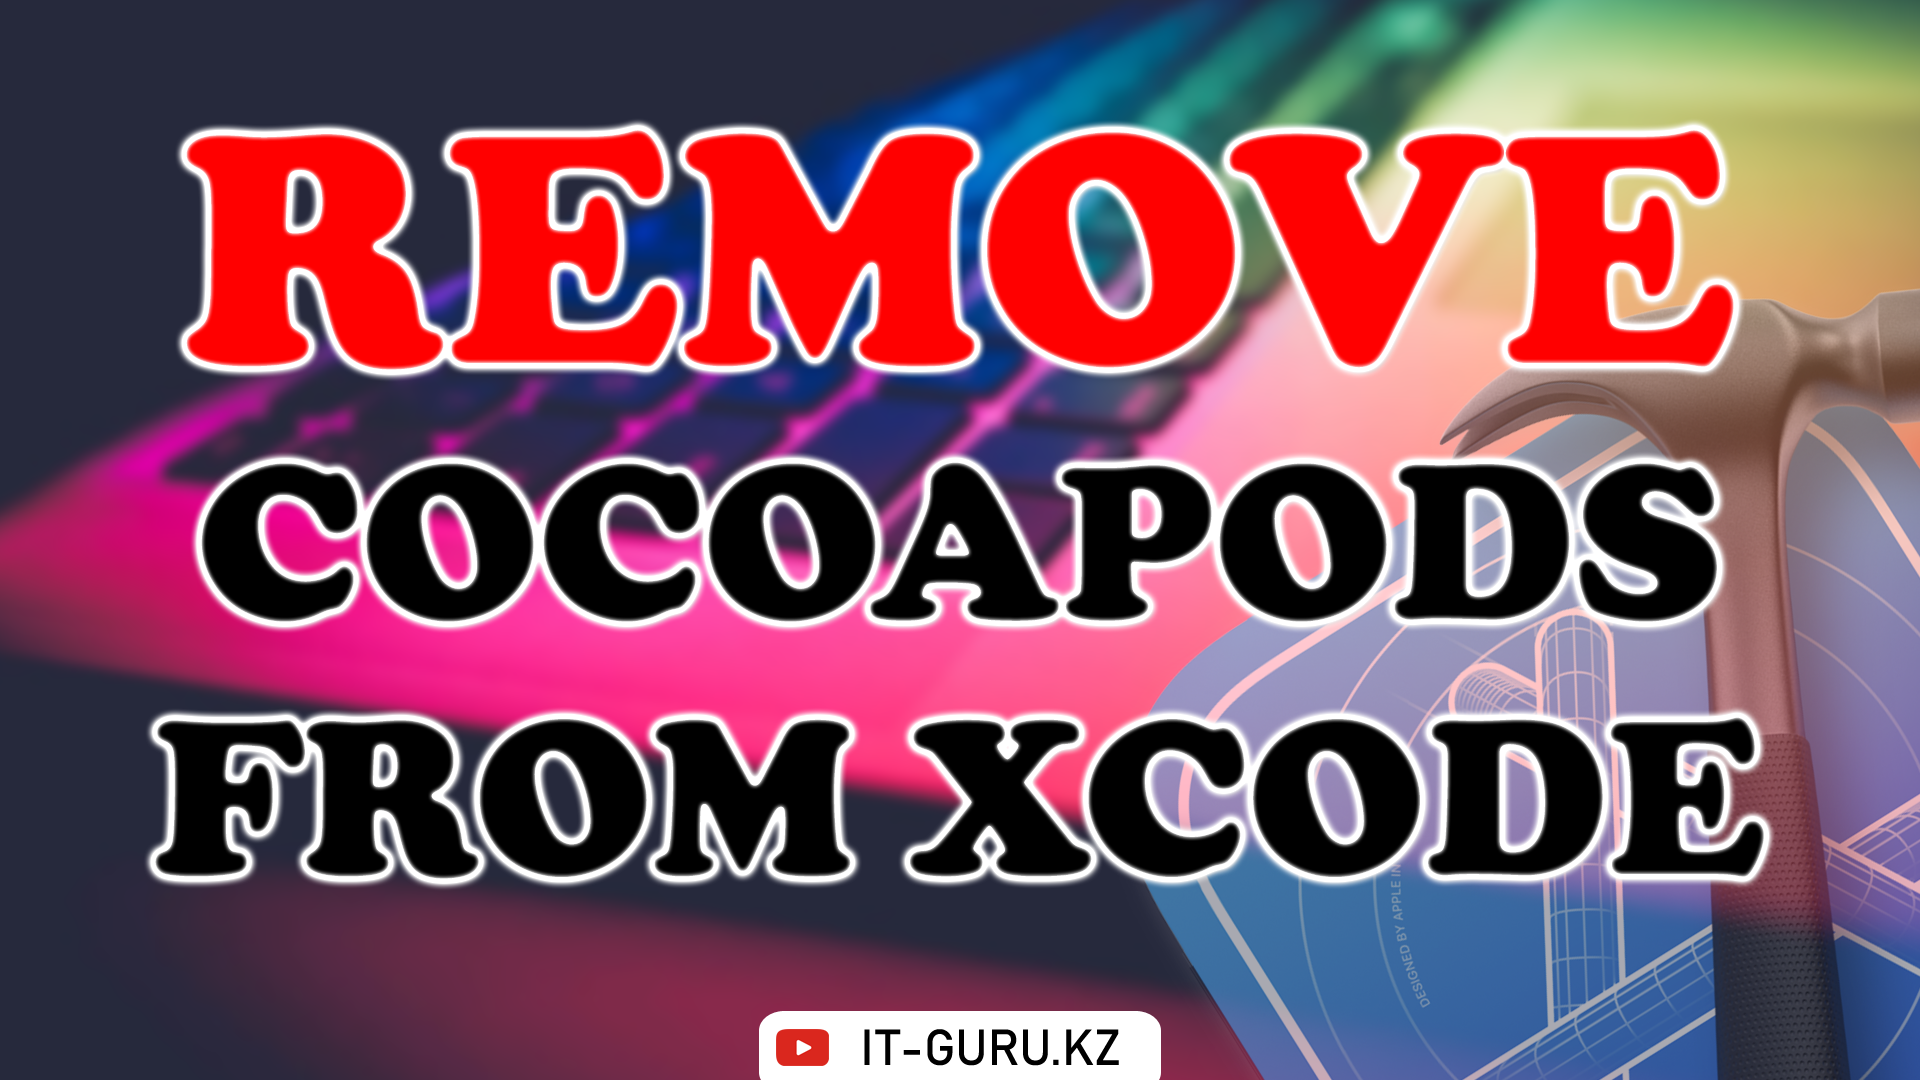 How to remove Cocoapods from an Xcode project using Terminal